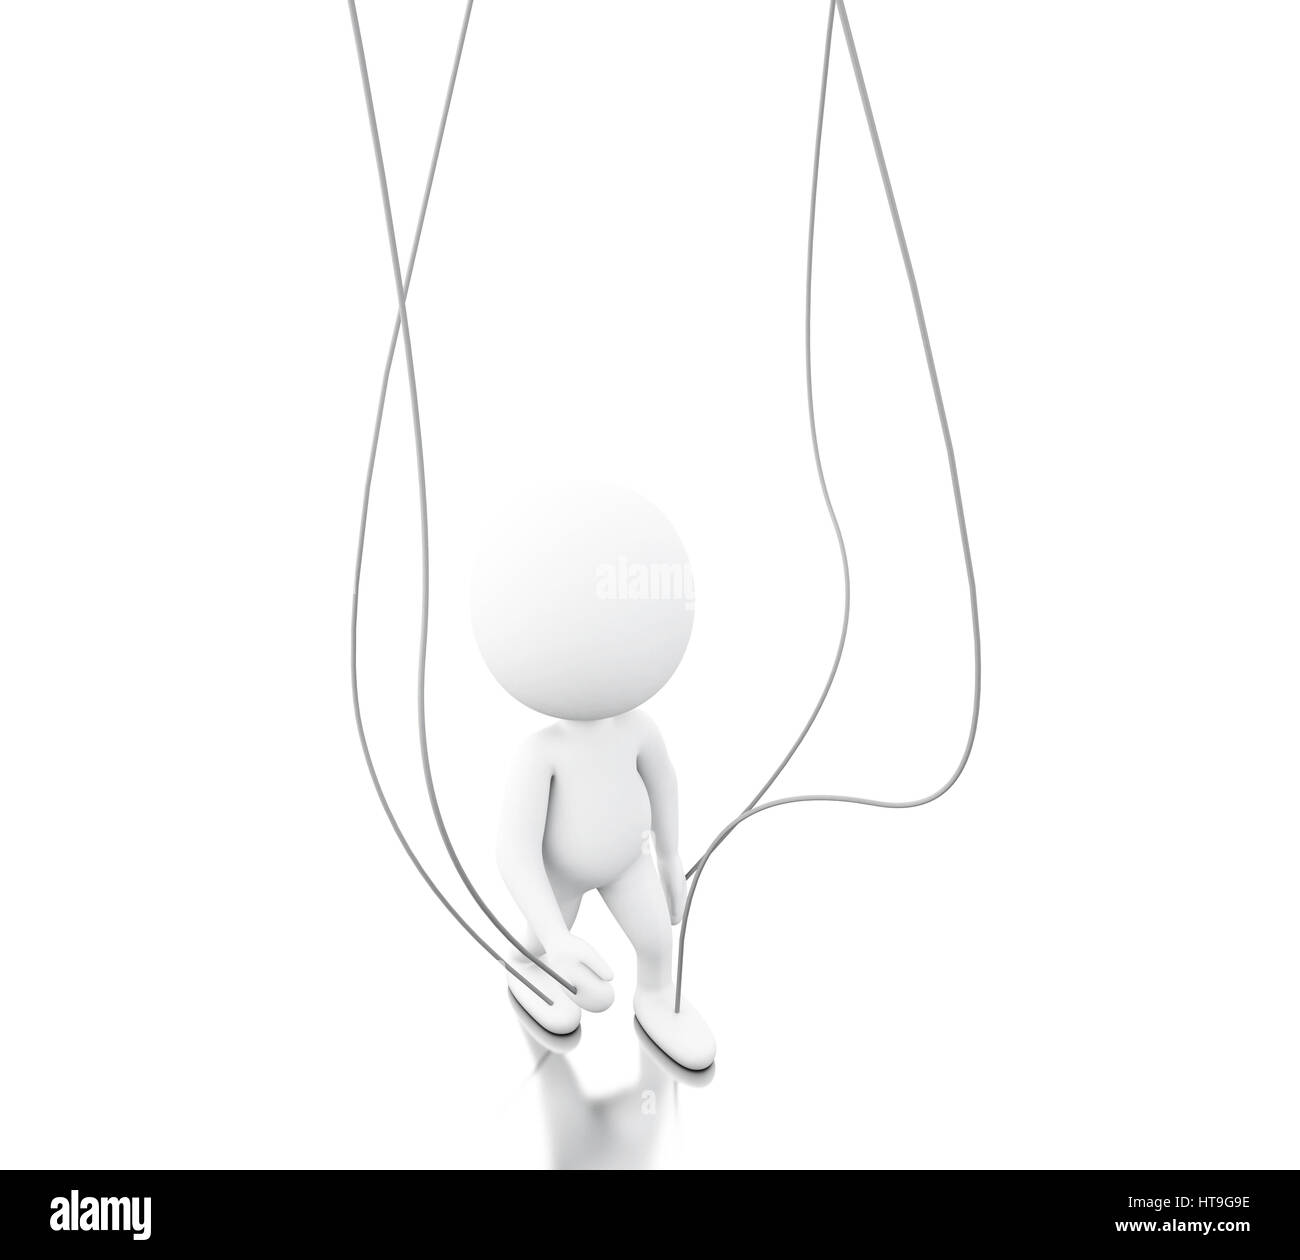 3d Illustration. White person manipulated by strings. Control concept. Isolated white background Stock Photo